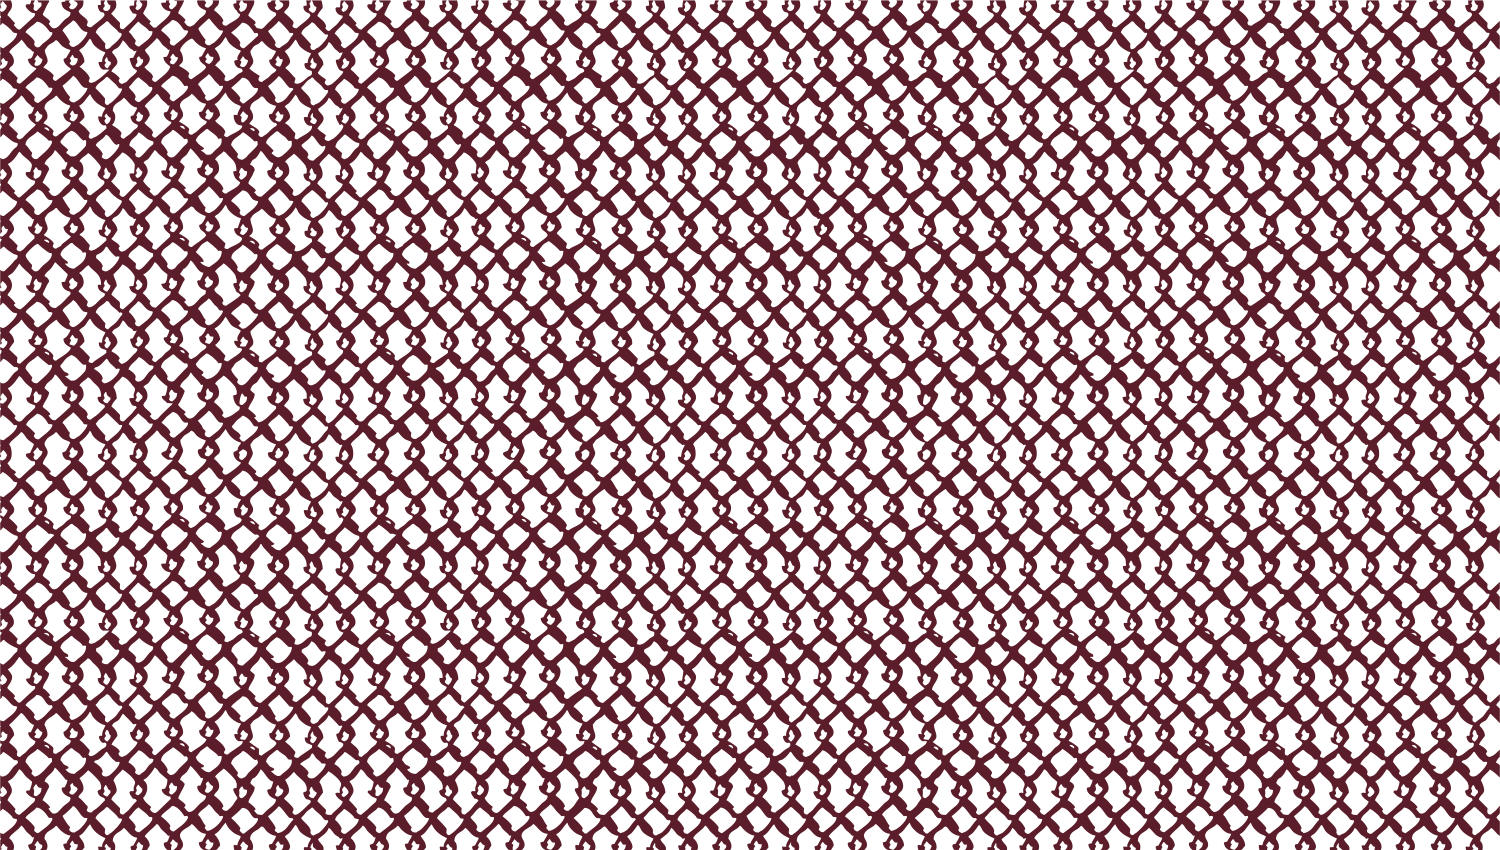 Parasoleil™ Bronx Blue© pattern displayed with a burgundy color overlay